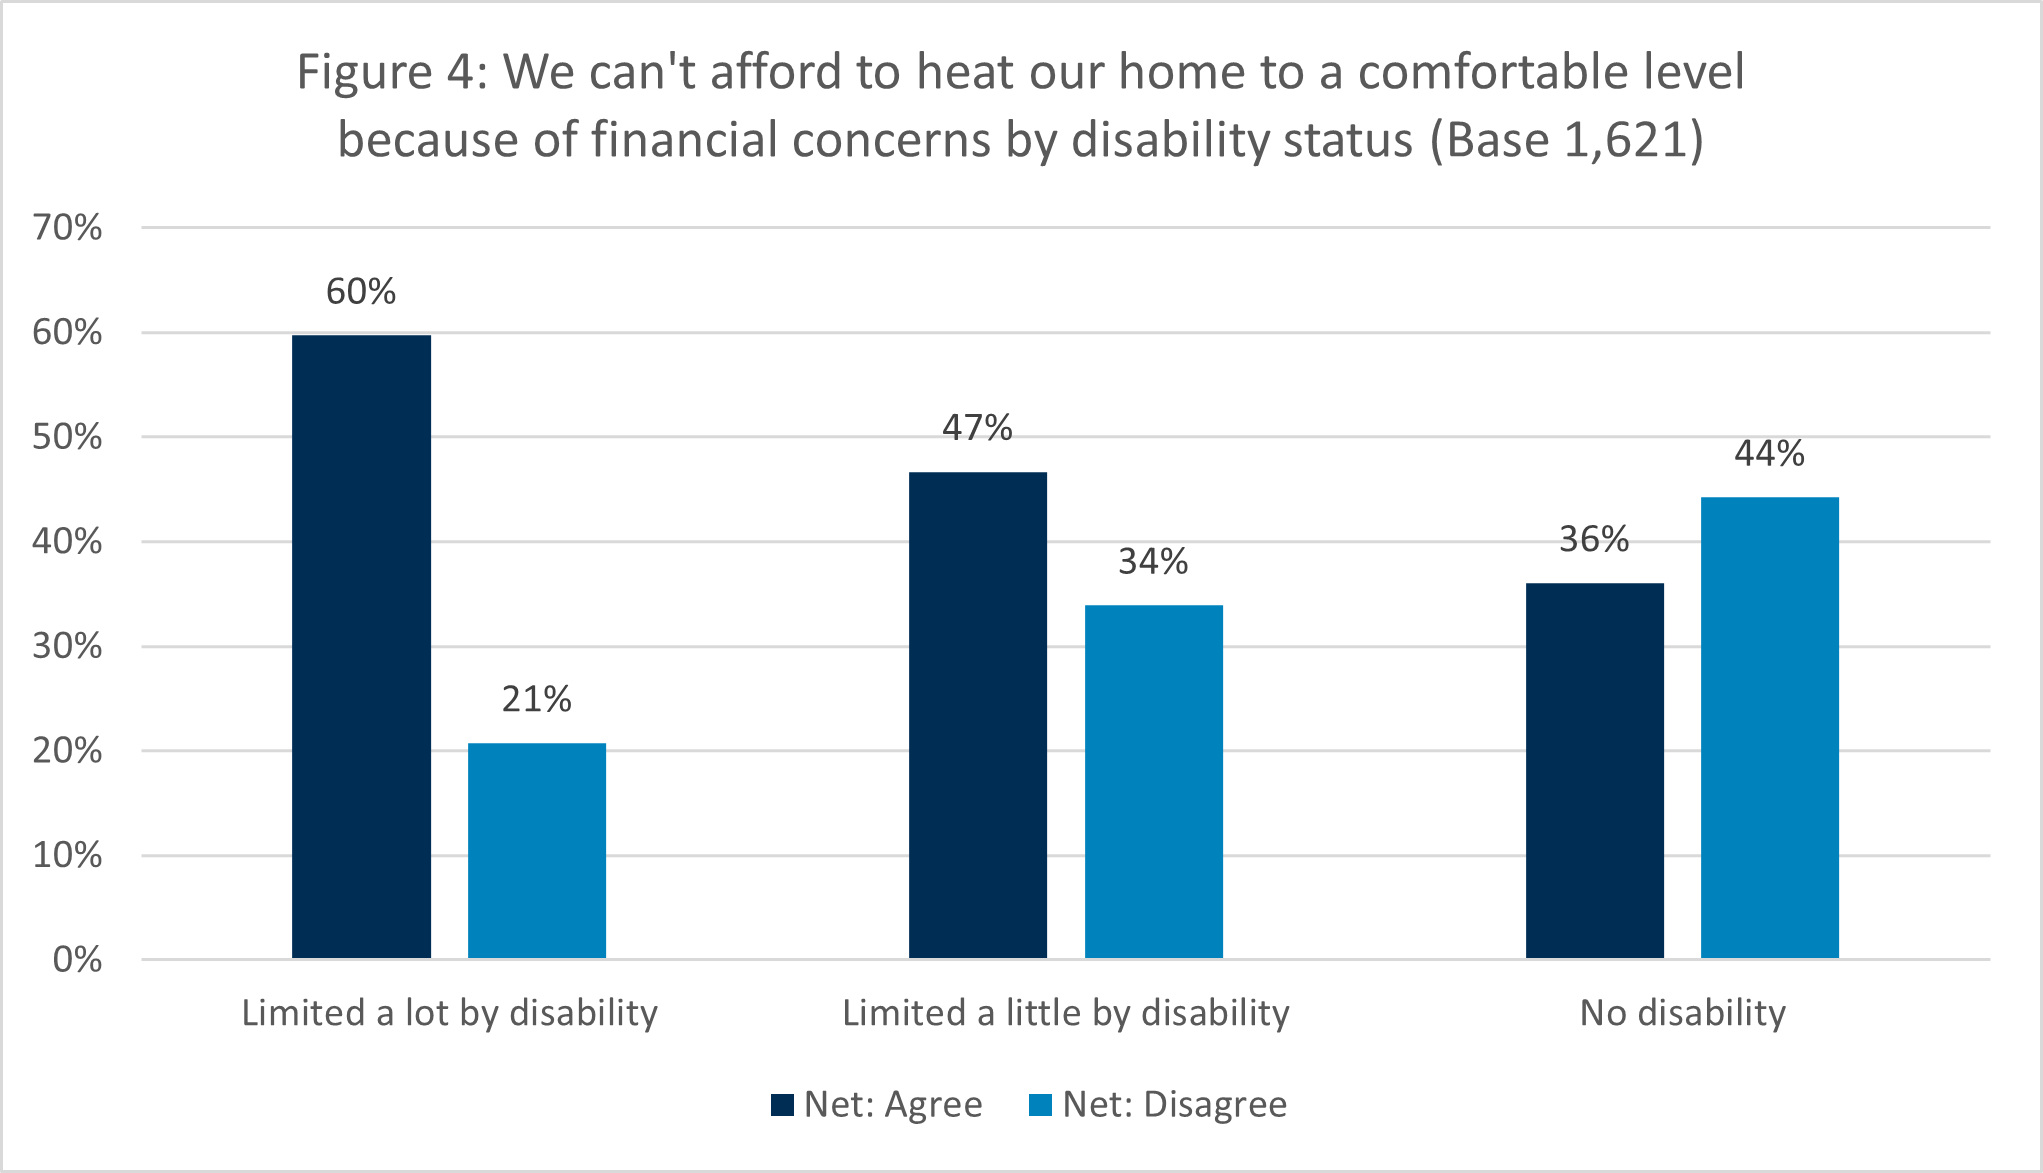 More disabled people can't heat their home to a comfortable temperature compared to non-disabled people with 21% of those limited a lot by disability disagreeing that they couldn't heat their home to a comfortable temperature compared with 44% of non-disabled people